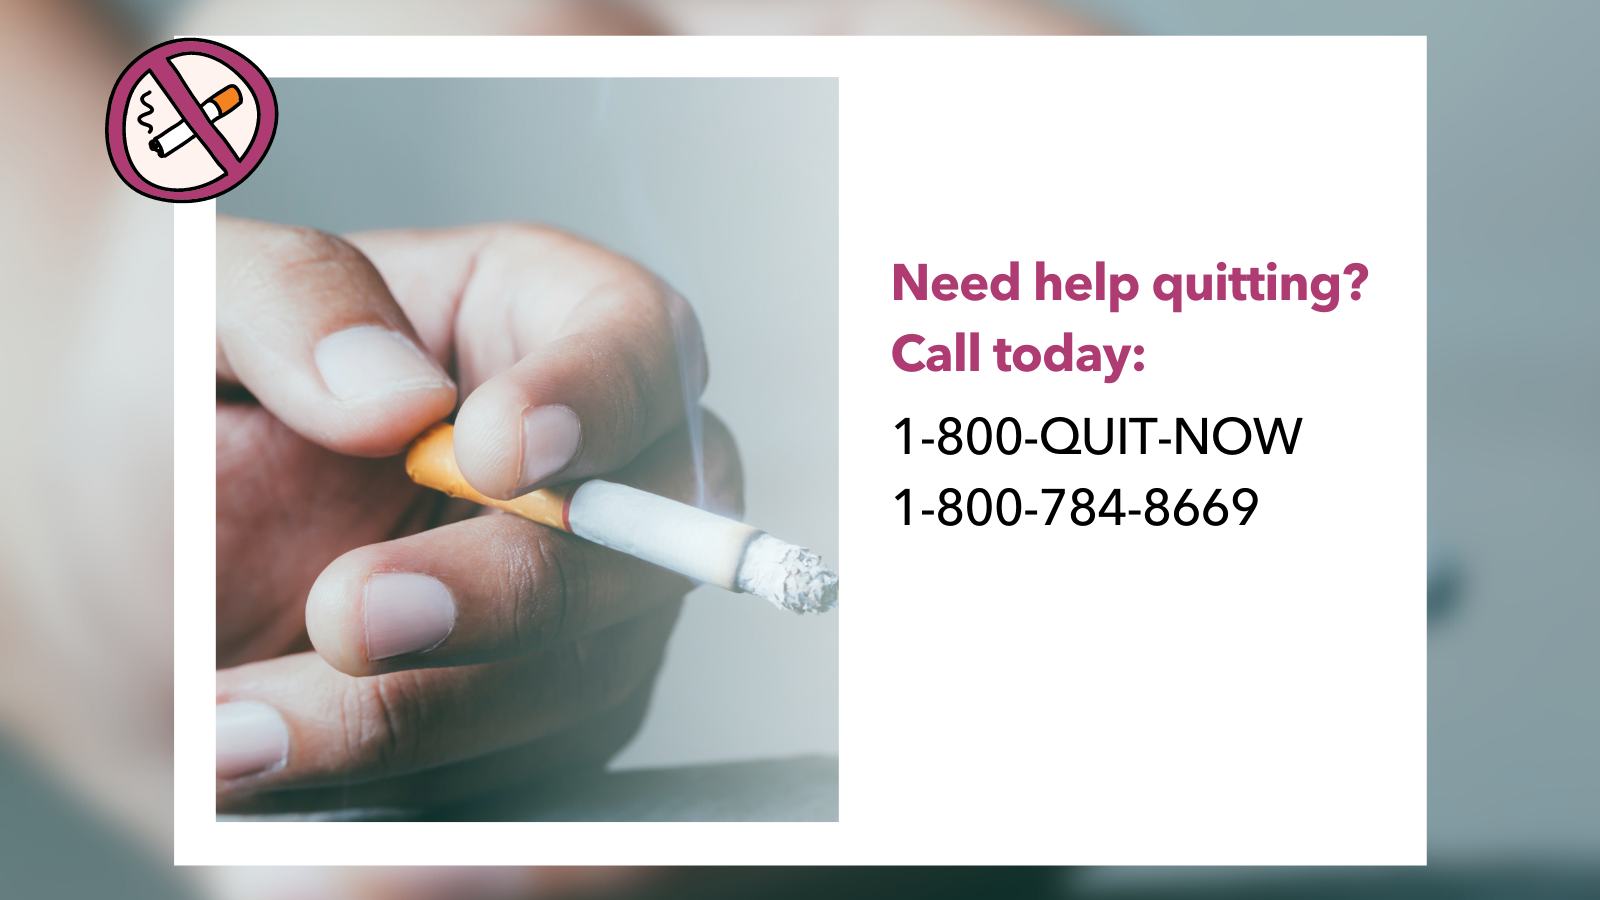 Need help quitting? Call 1-800-QUIT-NOW